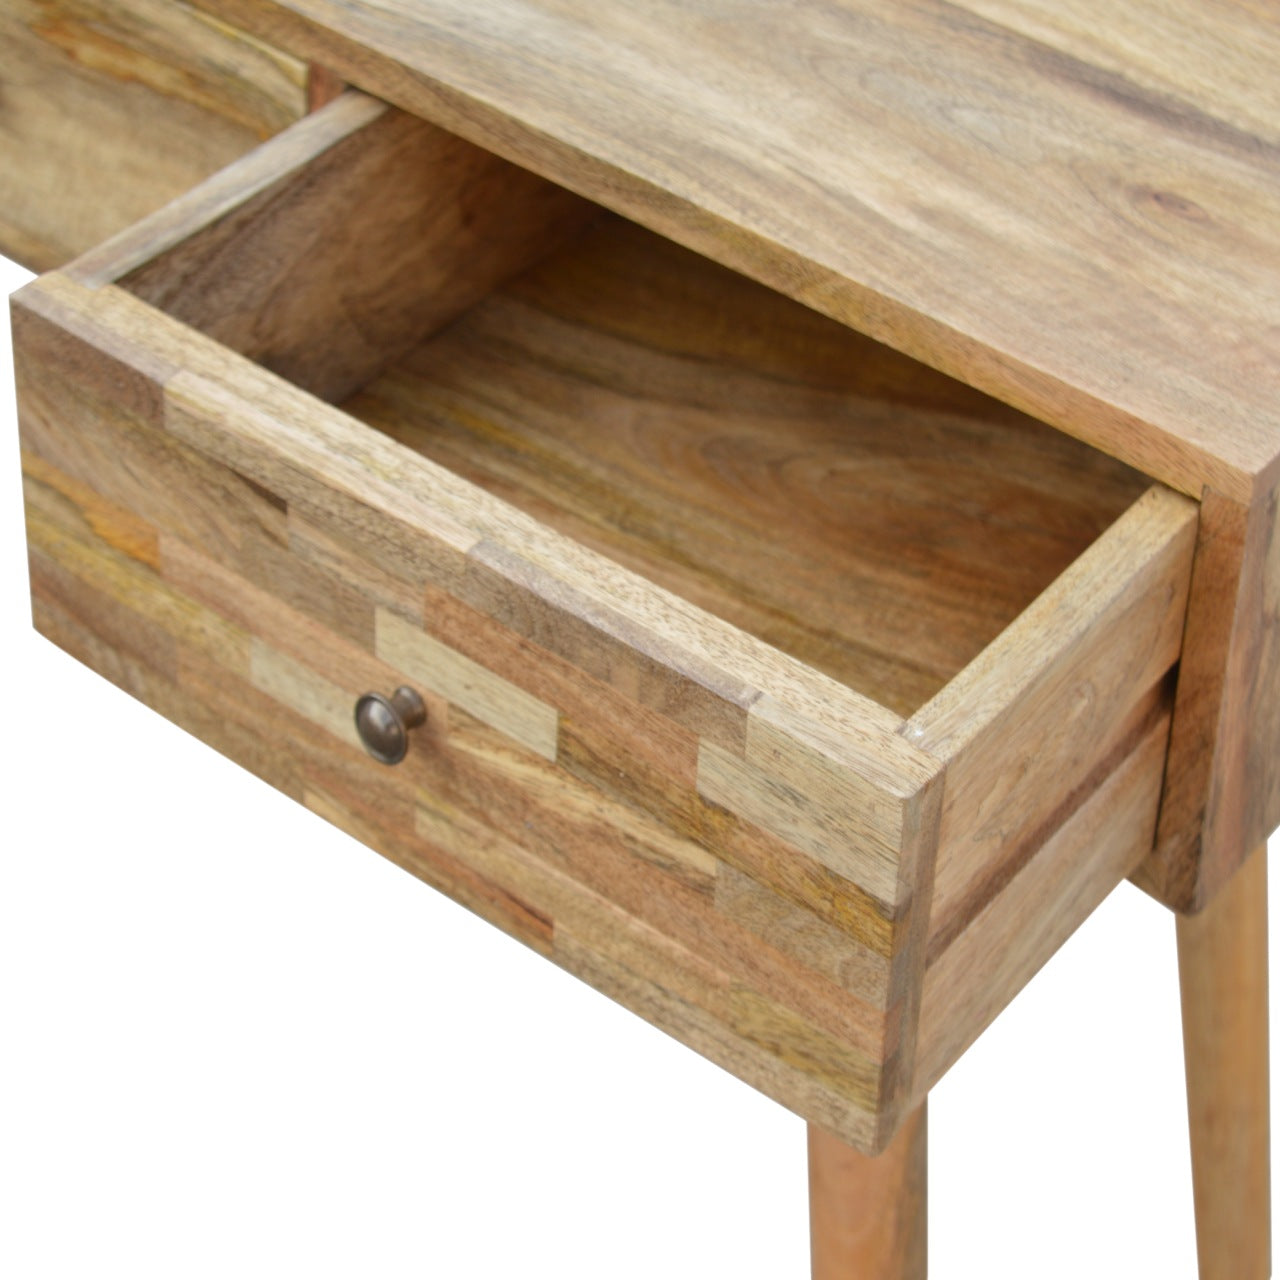 Three Drawer Wooden Patchwork Patterned Console Table